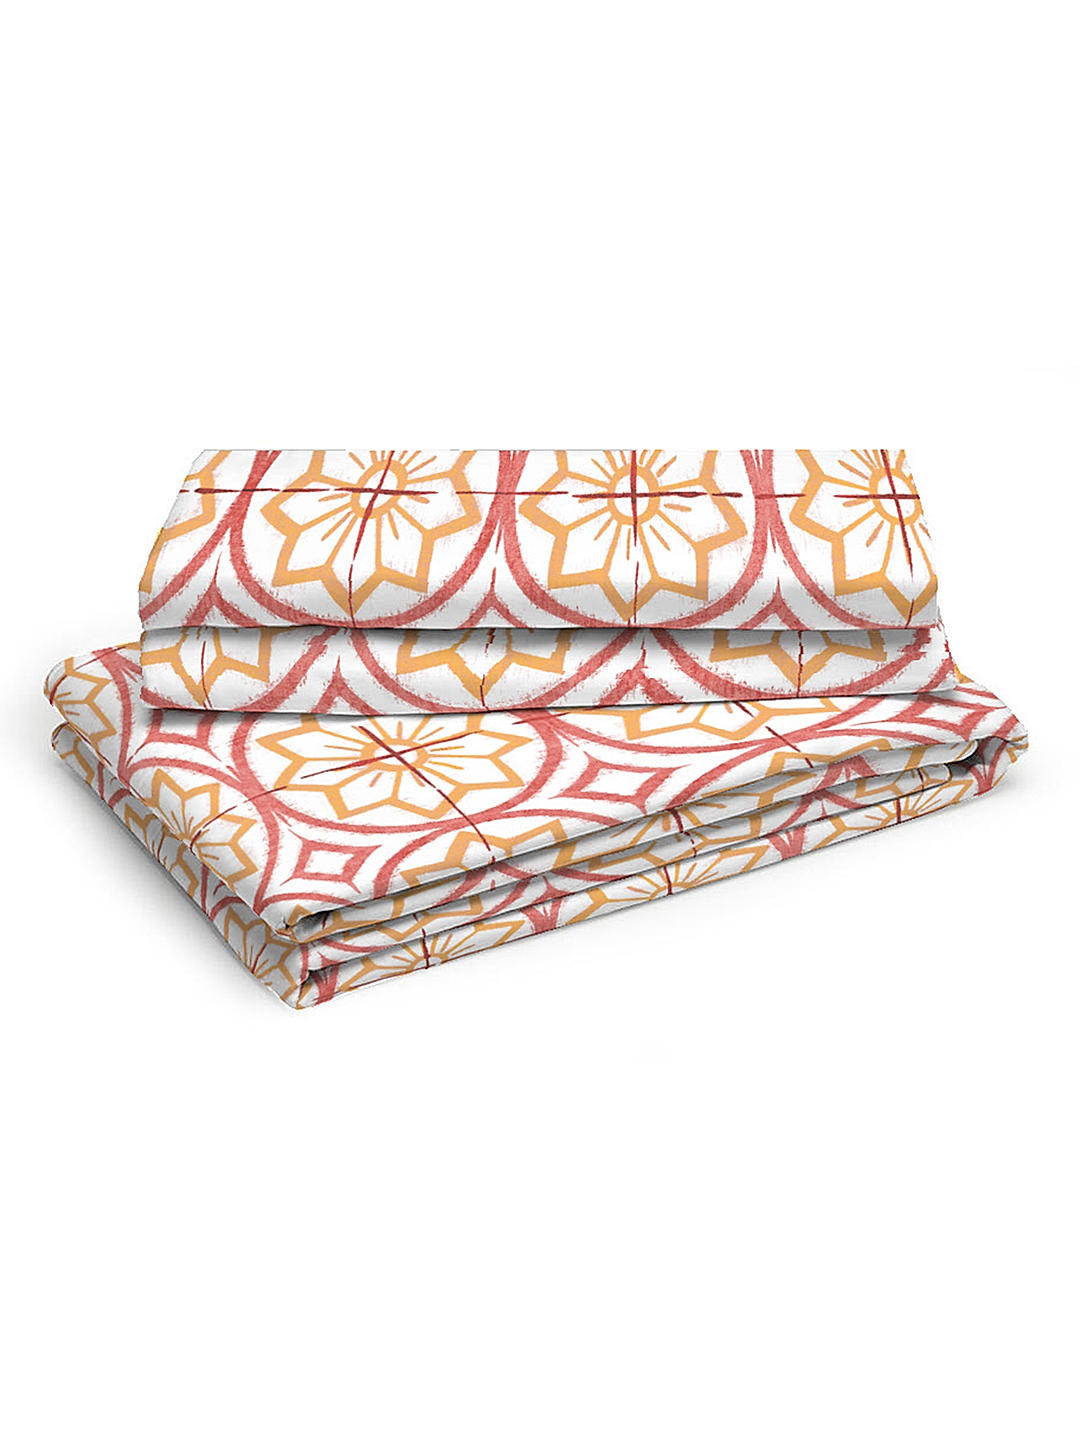 Signature Sateen 300 TC 100% cotton Ultra Fine Orange/Pink Colored Floral Print Fitted Bed Sheet Set